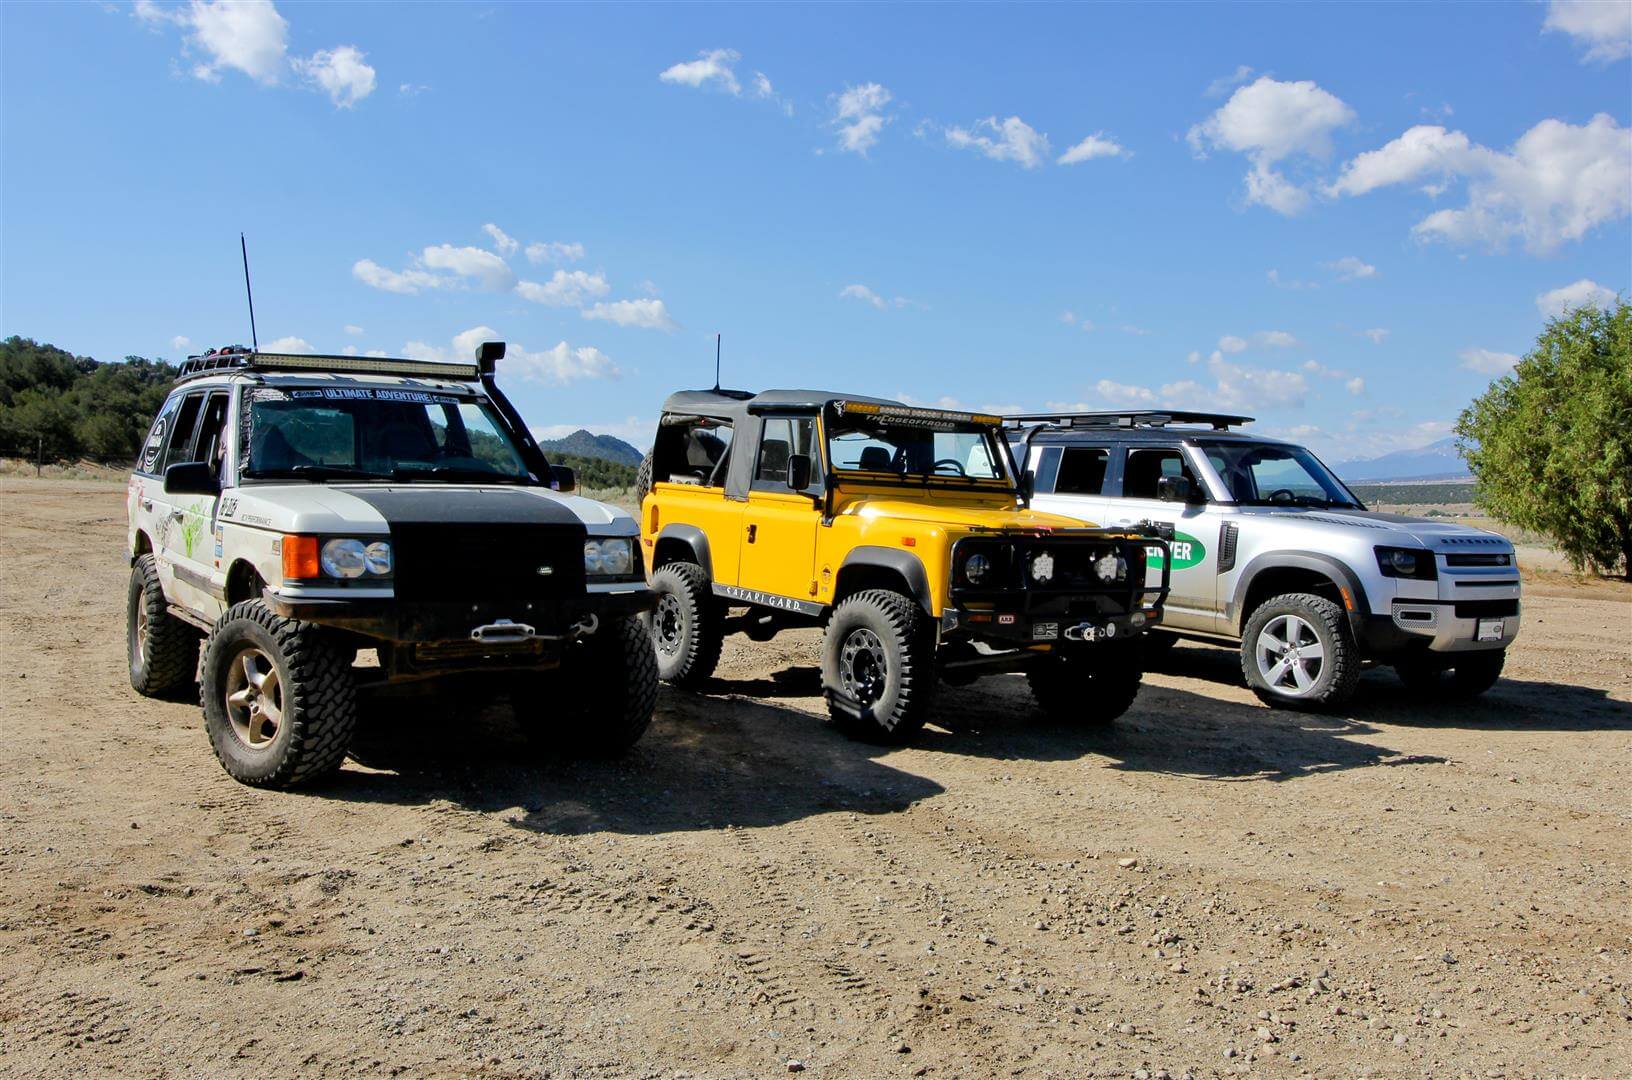 Trail head lineup with the New Defender